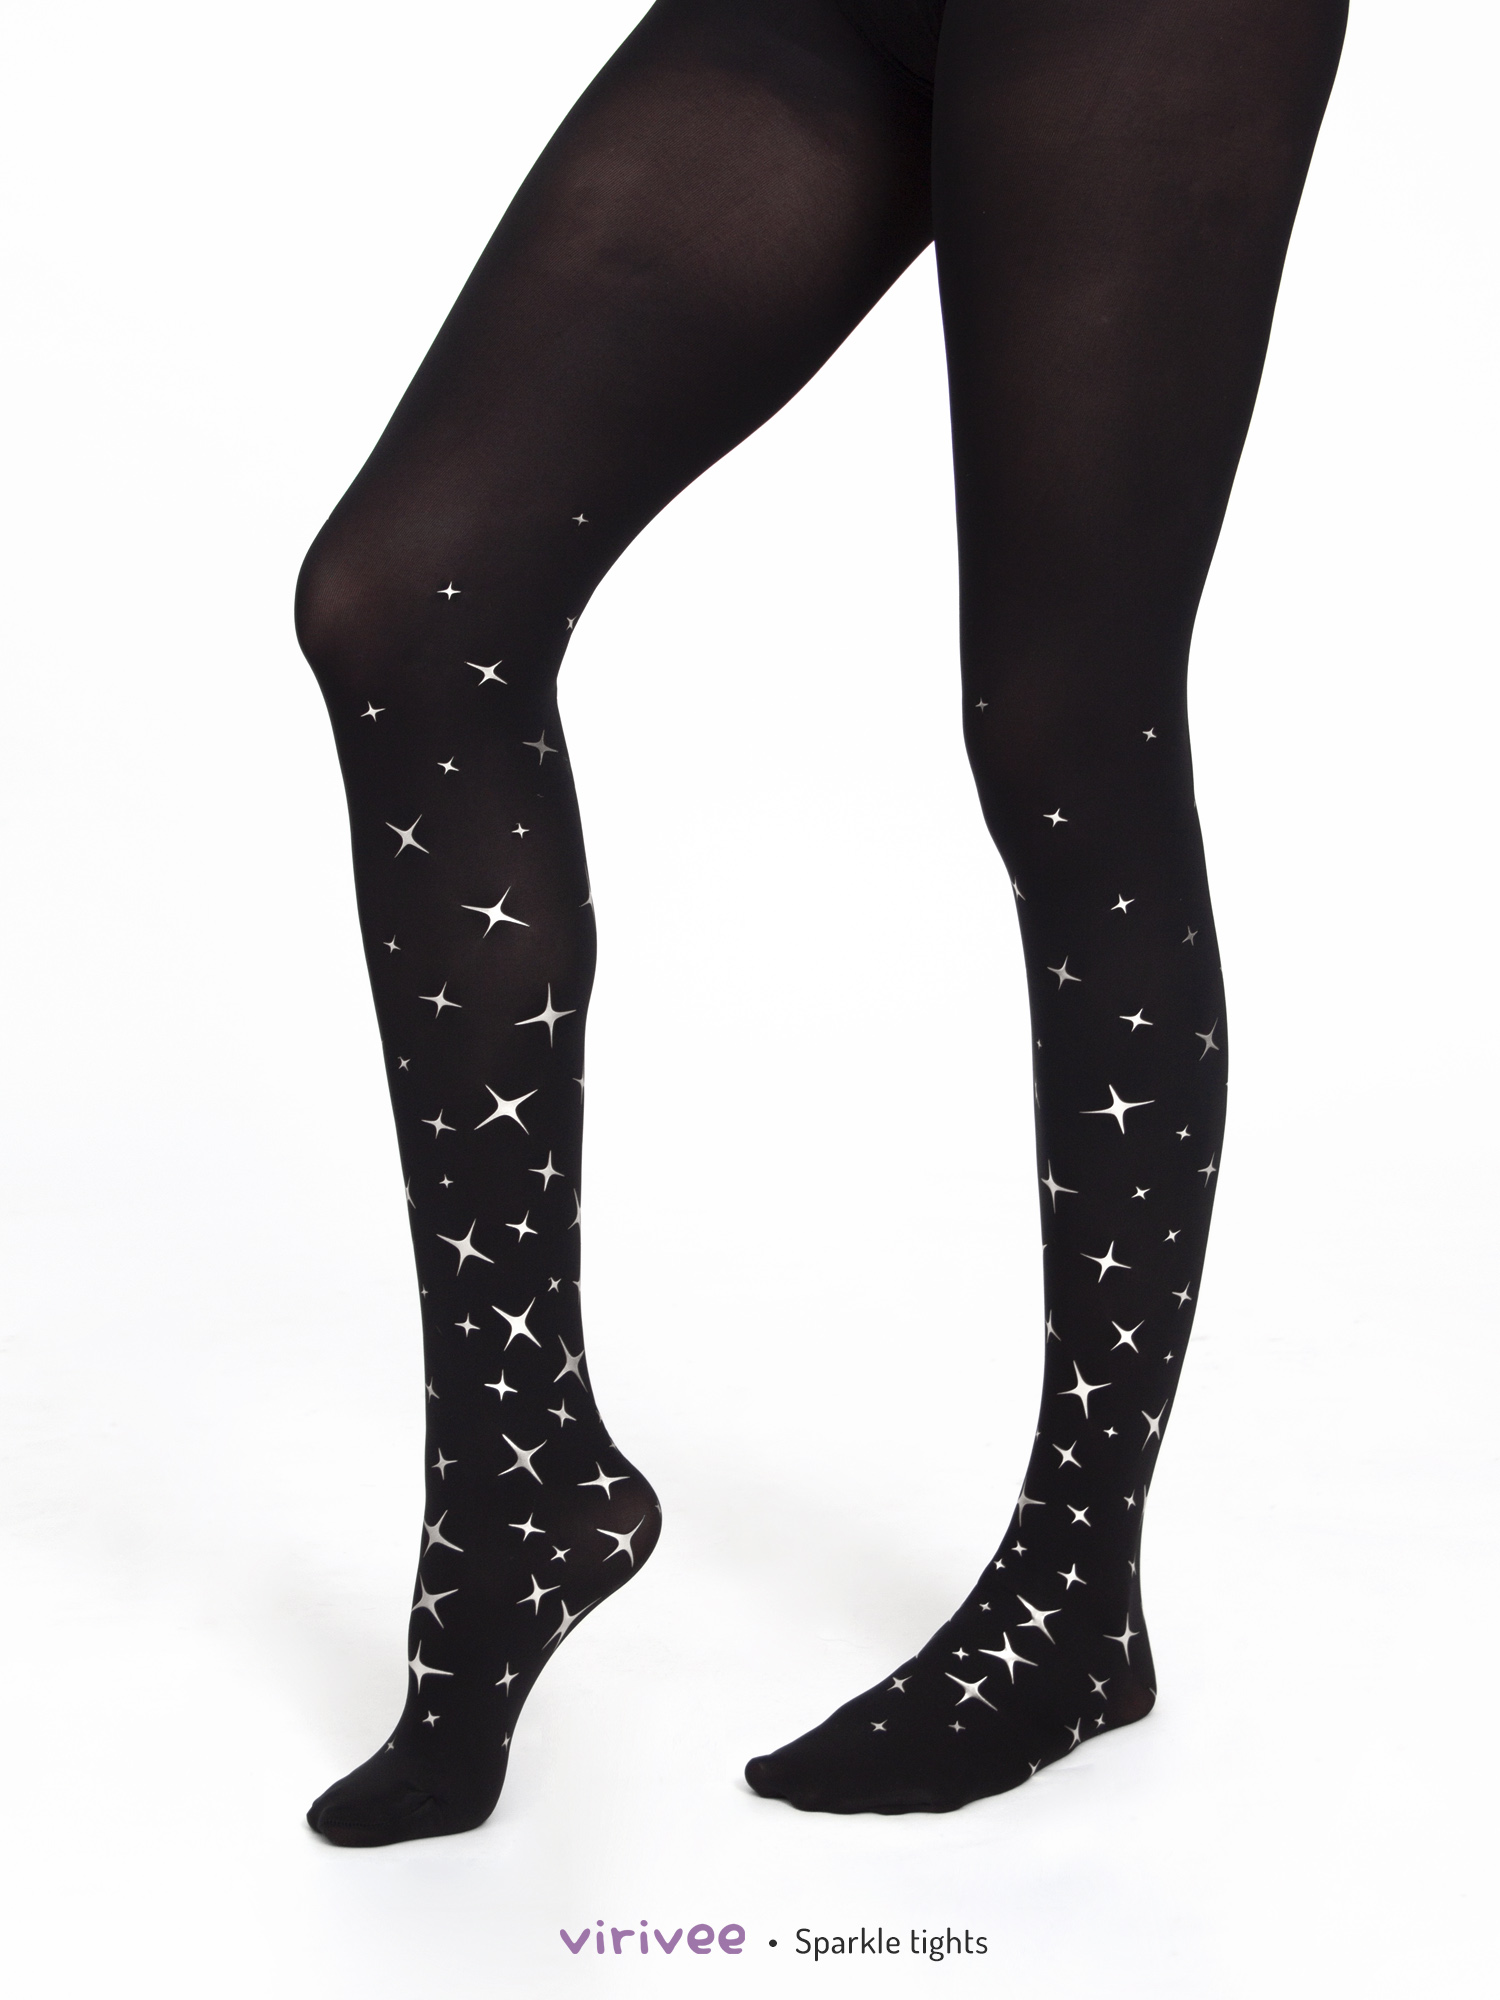 Dotted line tights - Virivee Tights - Unique tights designed and